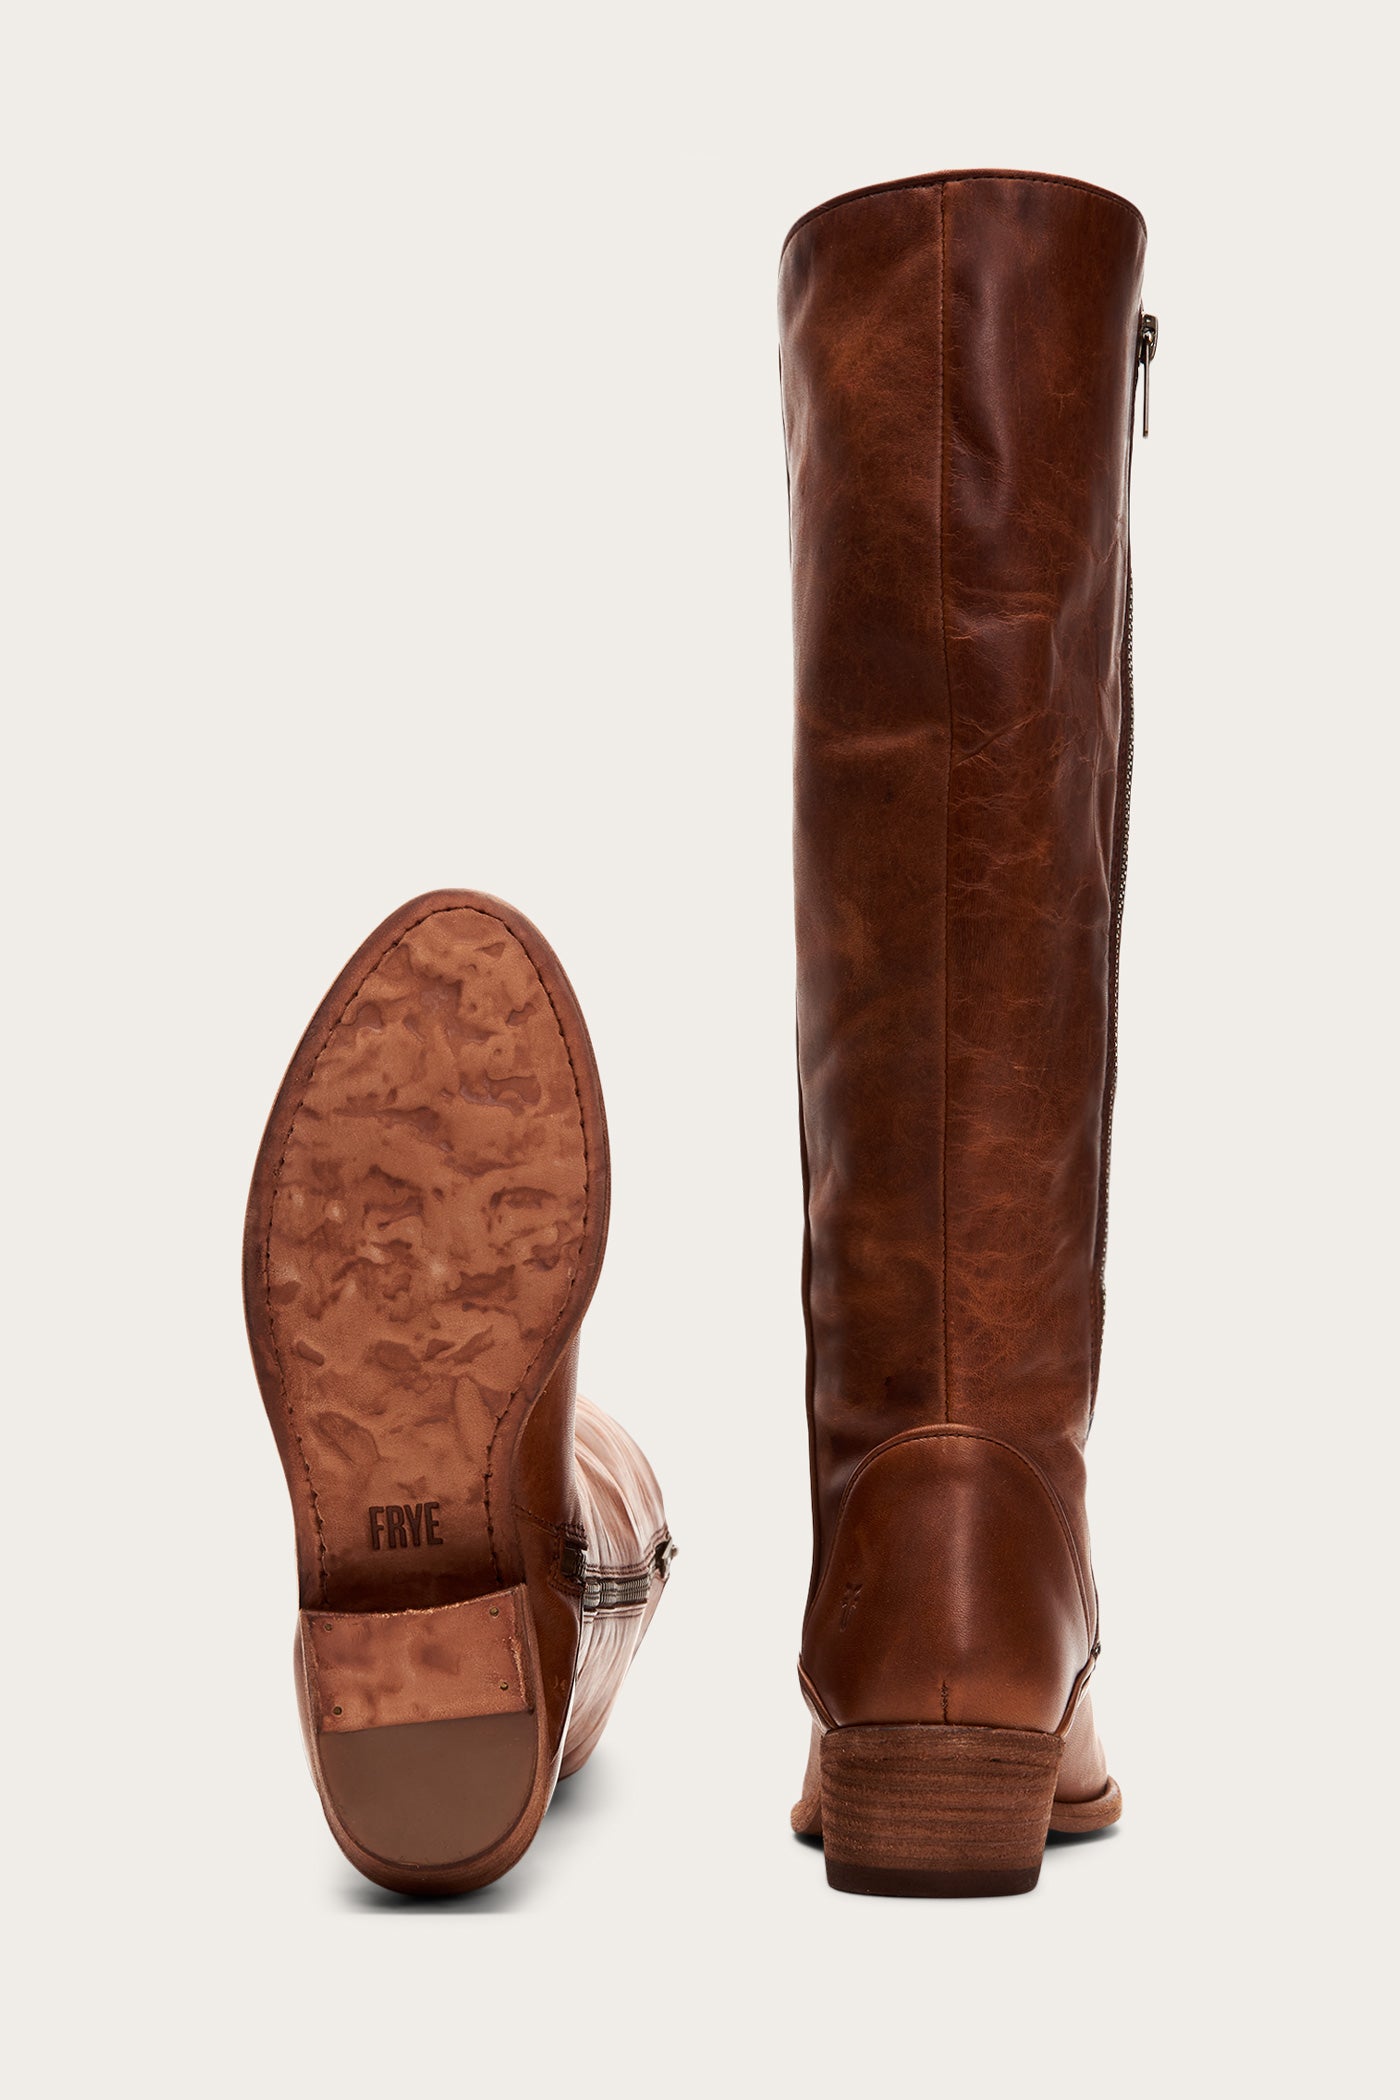 frye tall boots with zipper